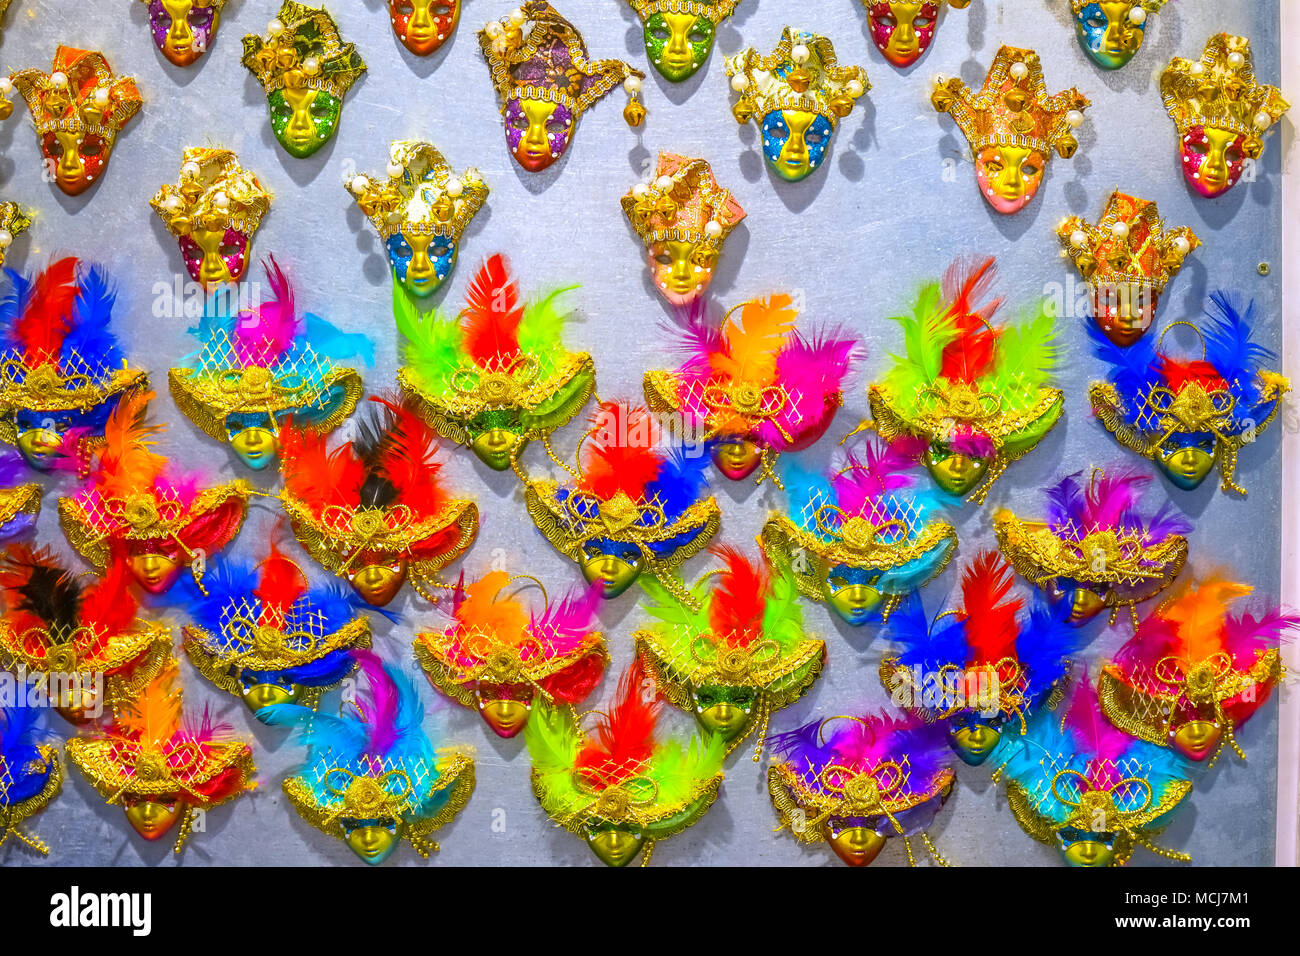 Small Venetian Masks Magnets Venice Italy Used since the 1200s for Carnival, which were celebrated just before Lent.  In ancient times, Masks allowed  Stock Photo